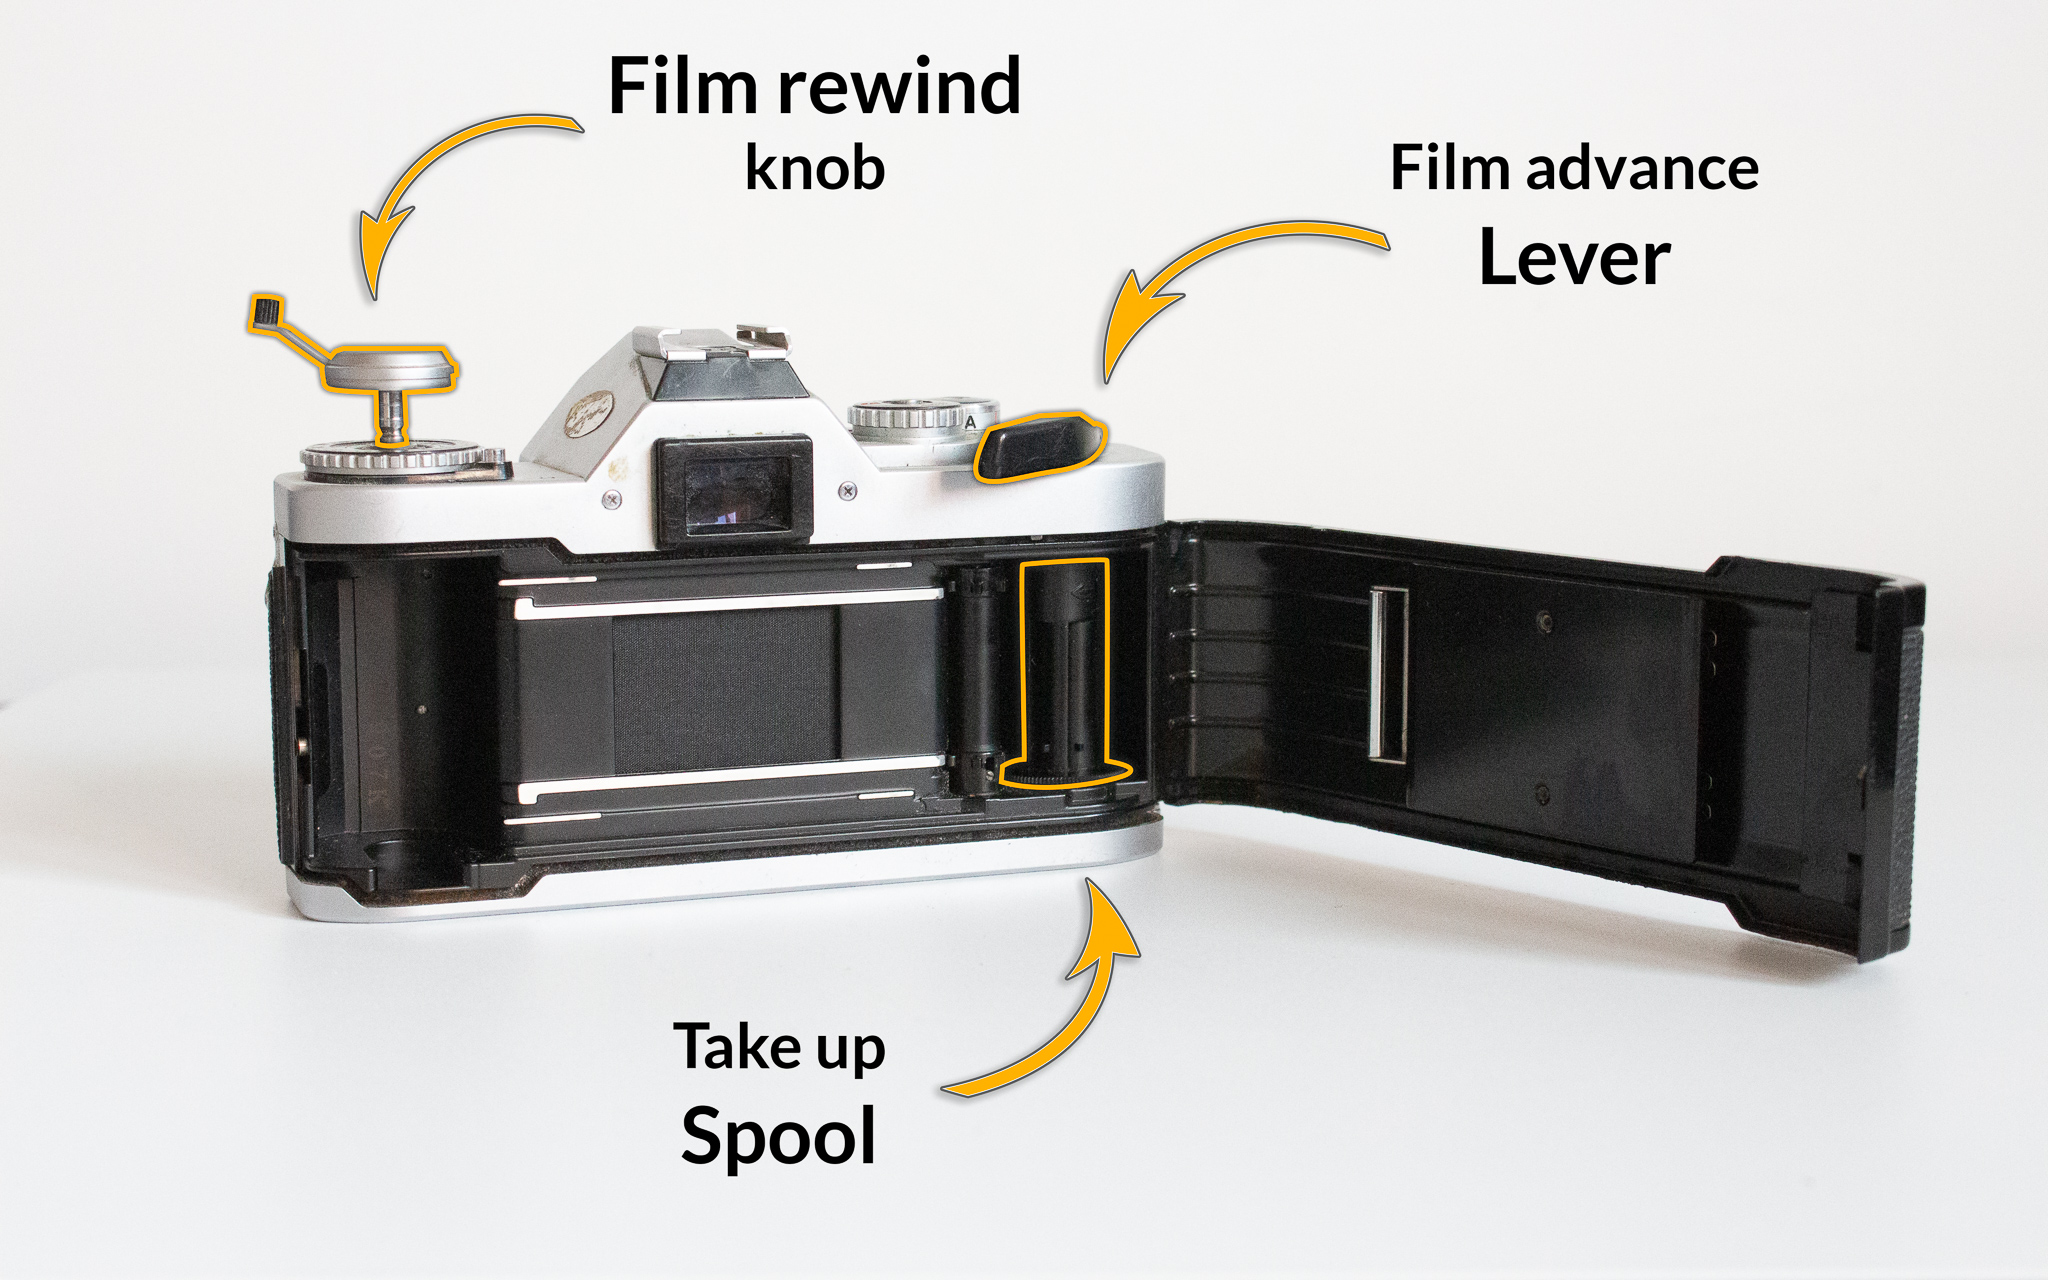 A Canon AV1 with the back cover opened